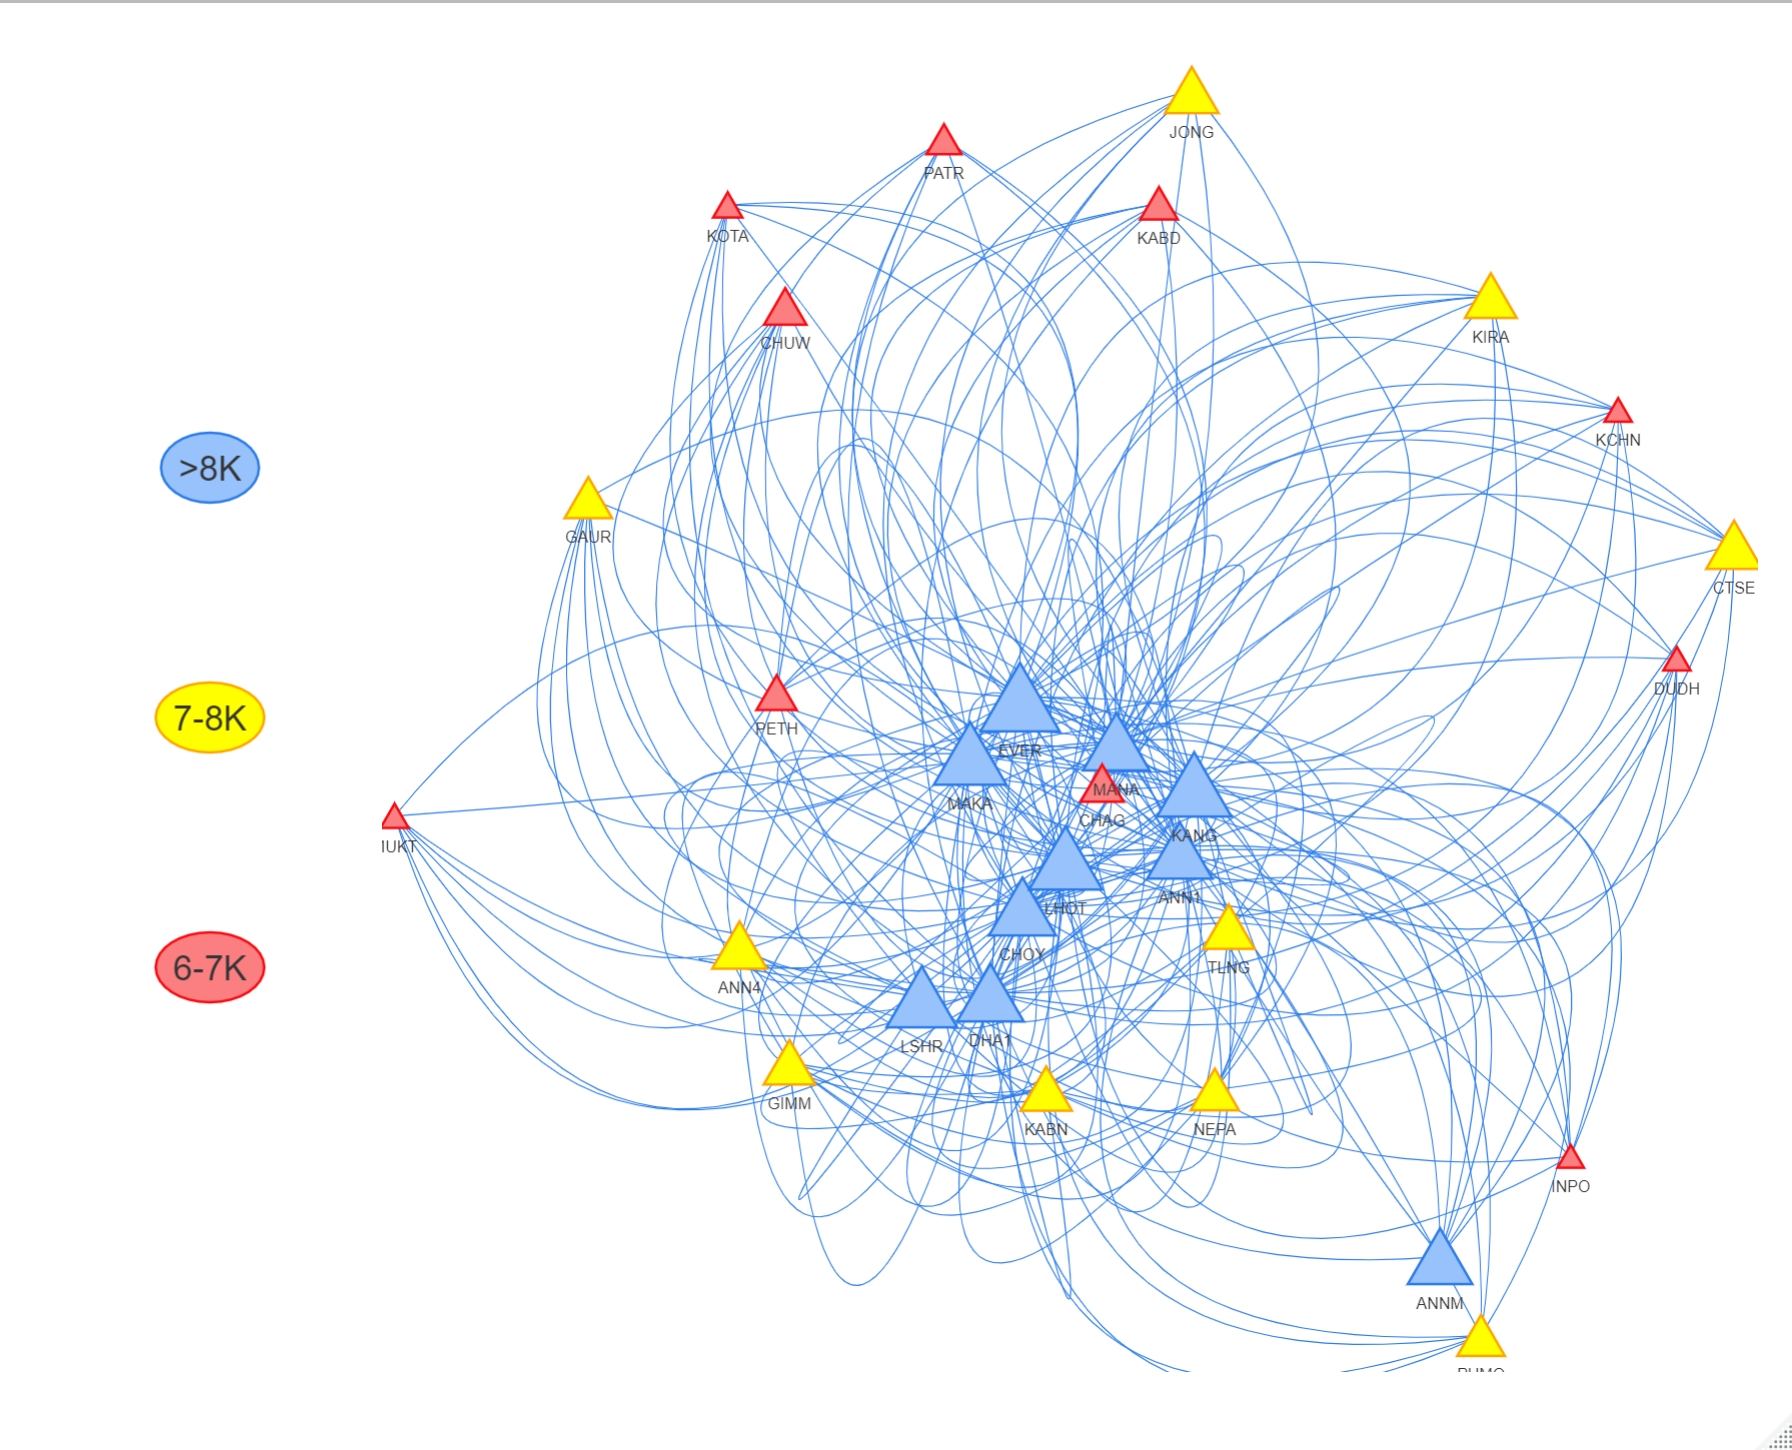 A network graph representing connections between various entities, which are depicted as triangles of different colors. The triangles are connected by numerous blue lines indicating relationships or interactions between the entities. The colors and sizes of the triangles seem to represent different groups and their significance, with a legend on the left side: Blue triangles represent entities with values greater than 8K. Yellow triangles represent entities with values between 7K and 8K. Red triangles represent entities with values between 6K and 7K. The graph is highly interconnected, suggesting a complex web of relationships among the entities, each labeled with a unique identifier.